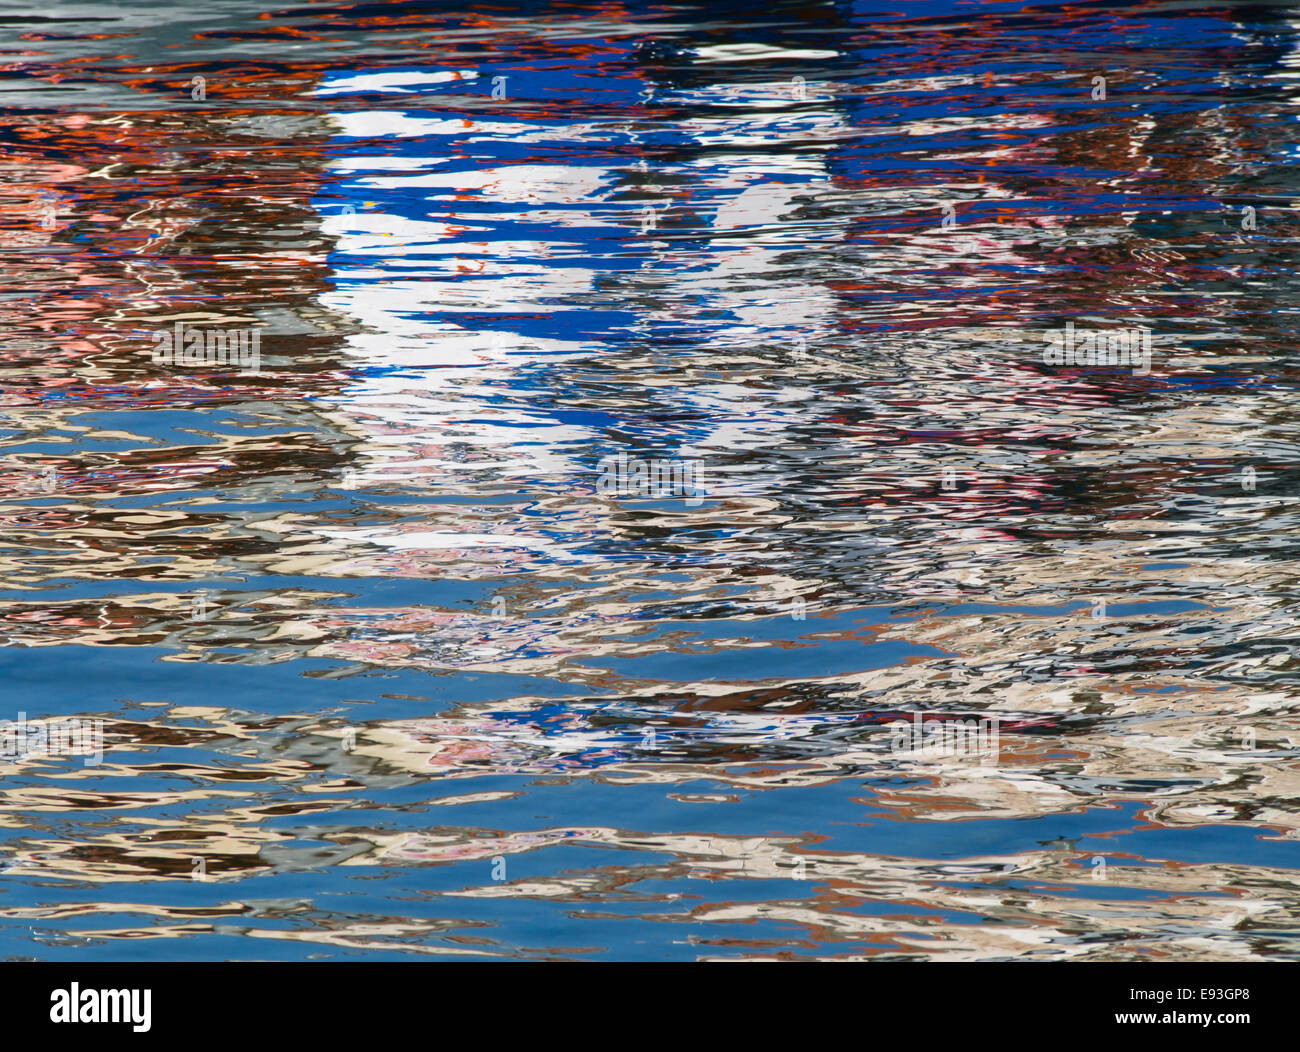 Summer, sun, sea and boats, an abstract reflected impression of a Mediterranean holiday, Samos Greece Stock Photo